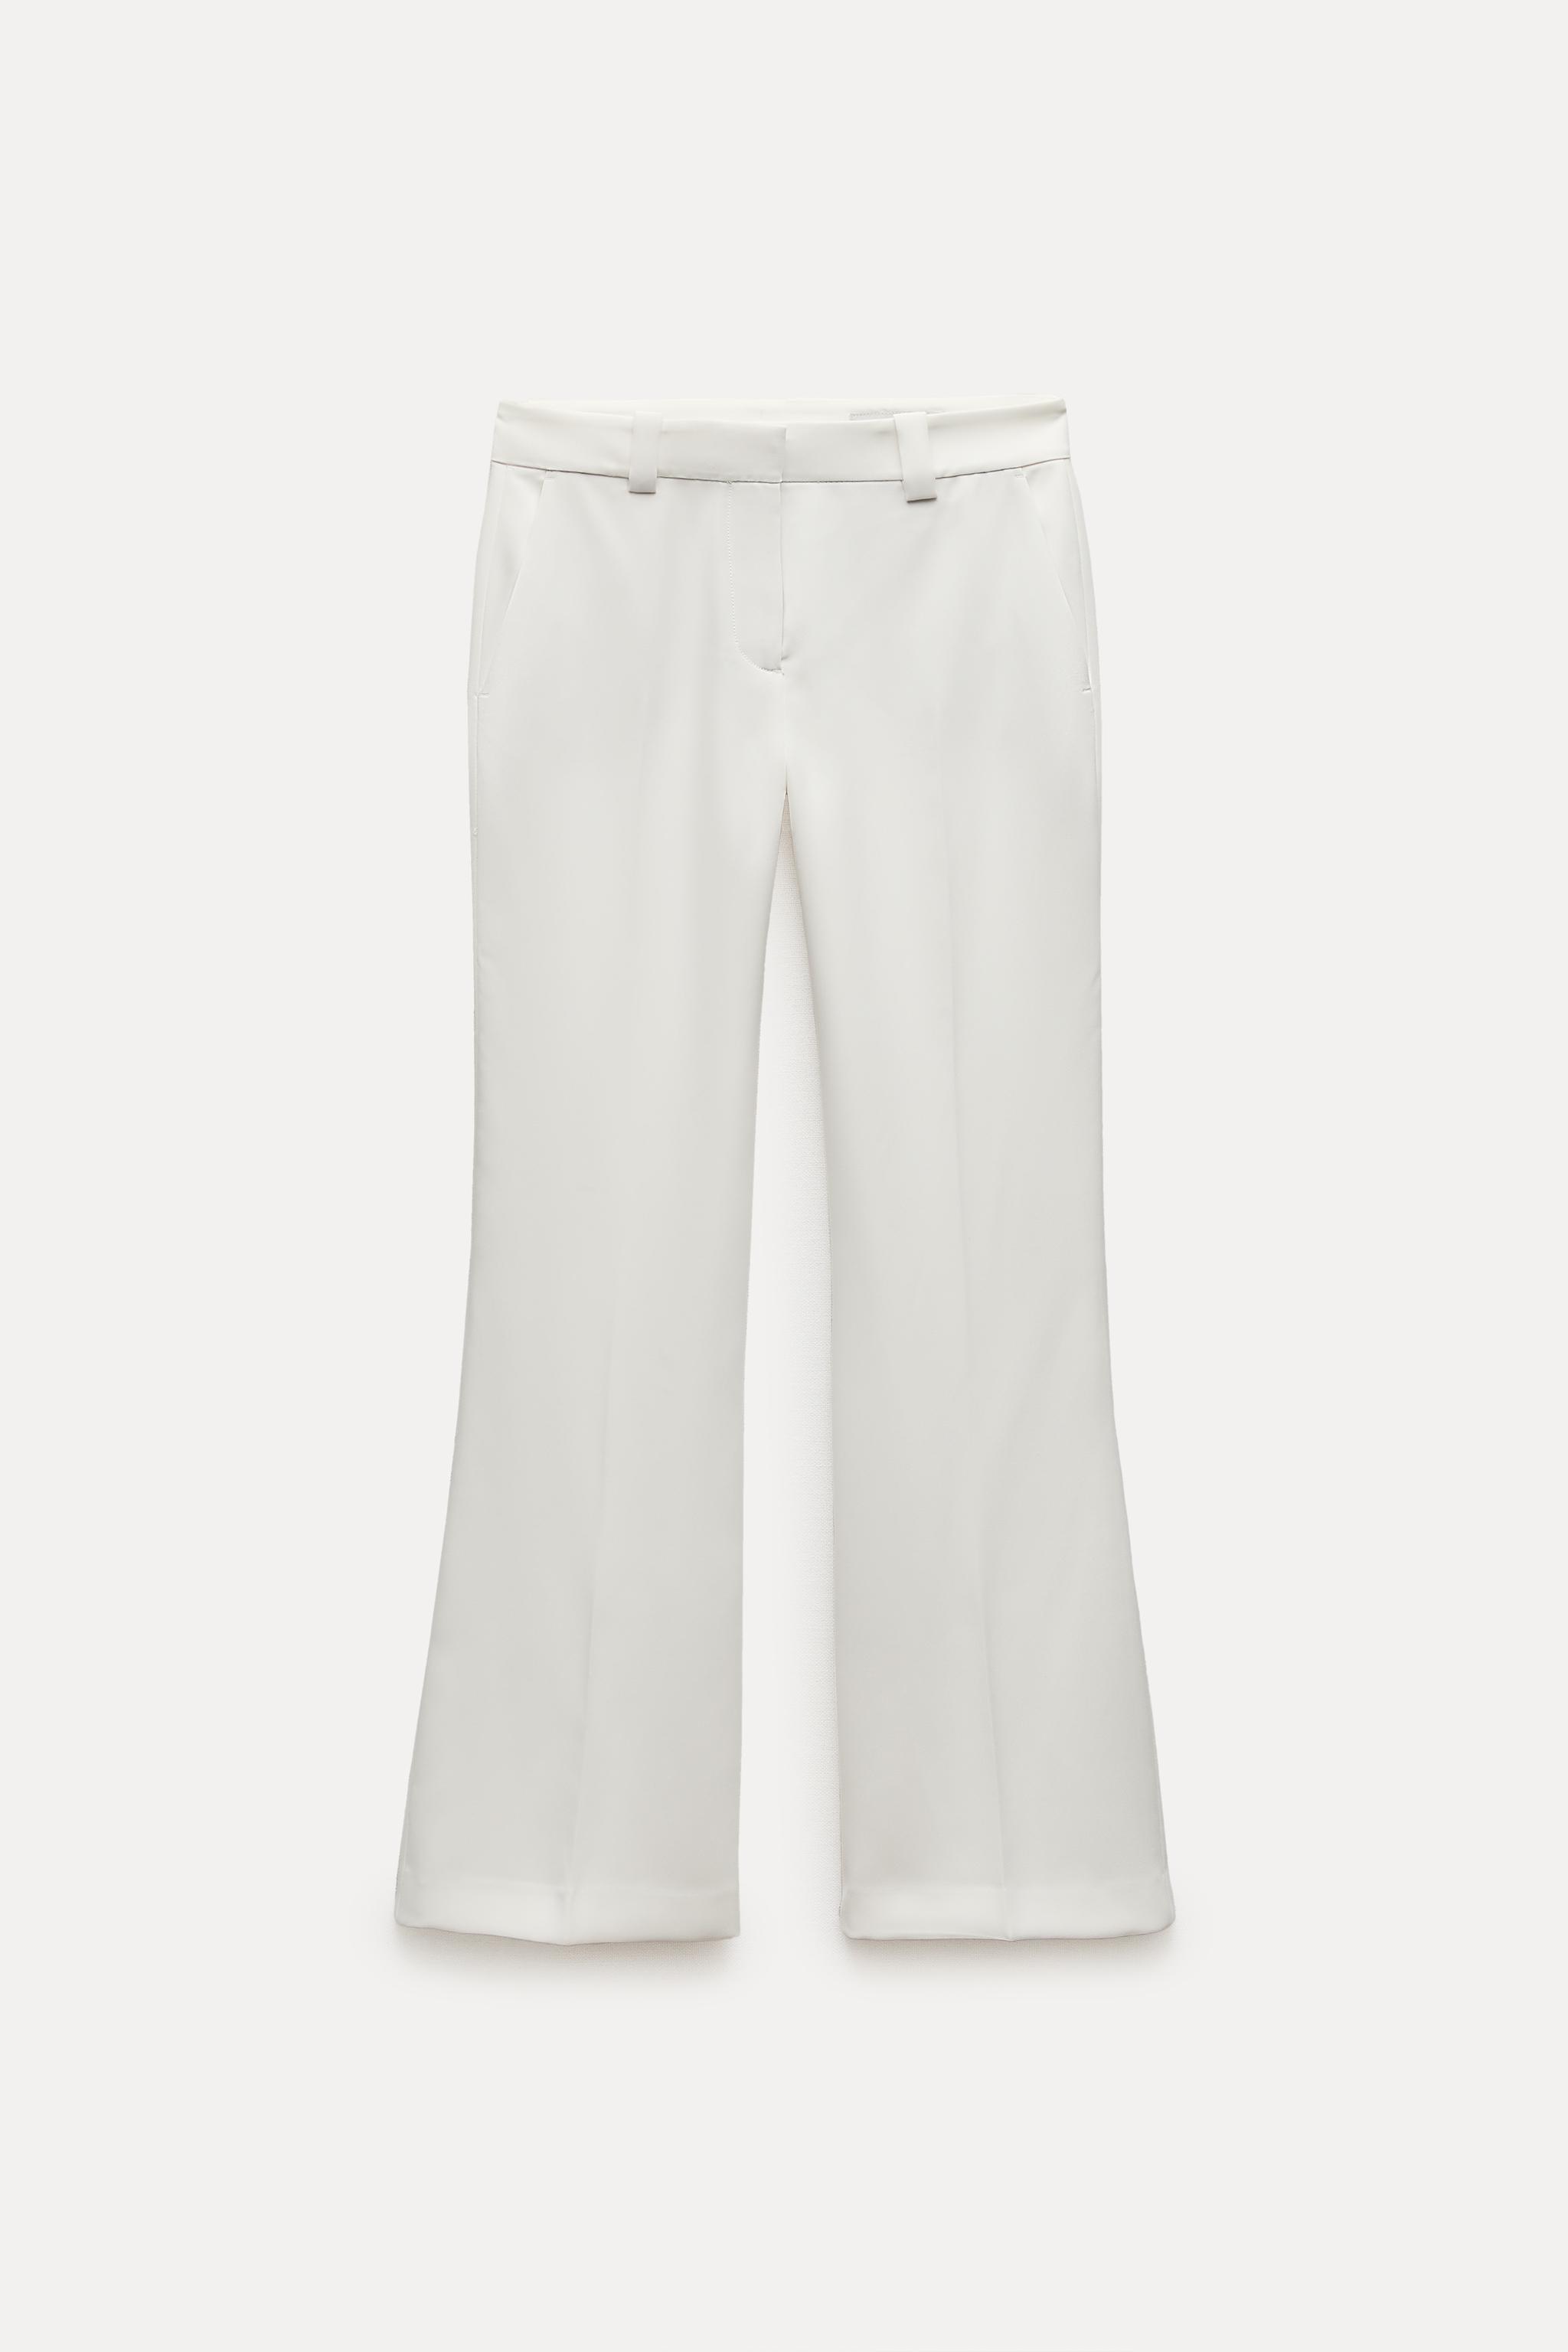 ZARA Flared Pants>>>> Follow us to stay tuned next Zara Collection